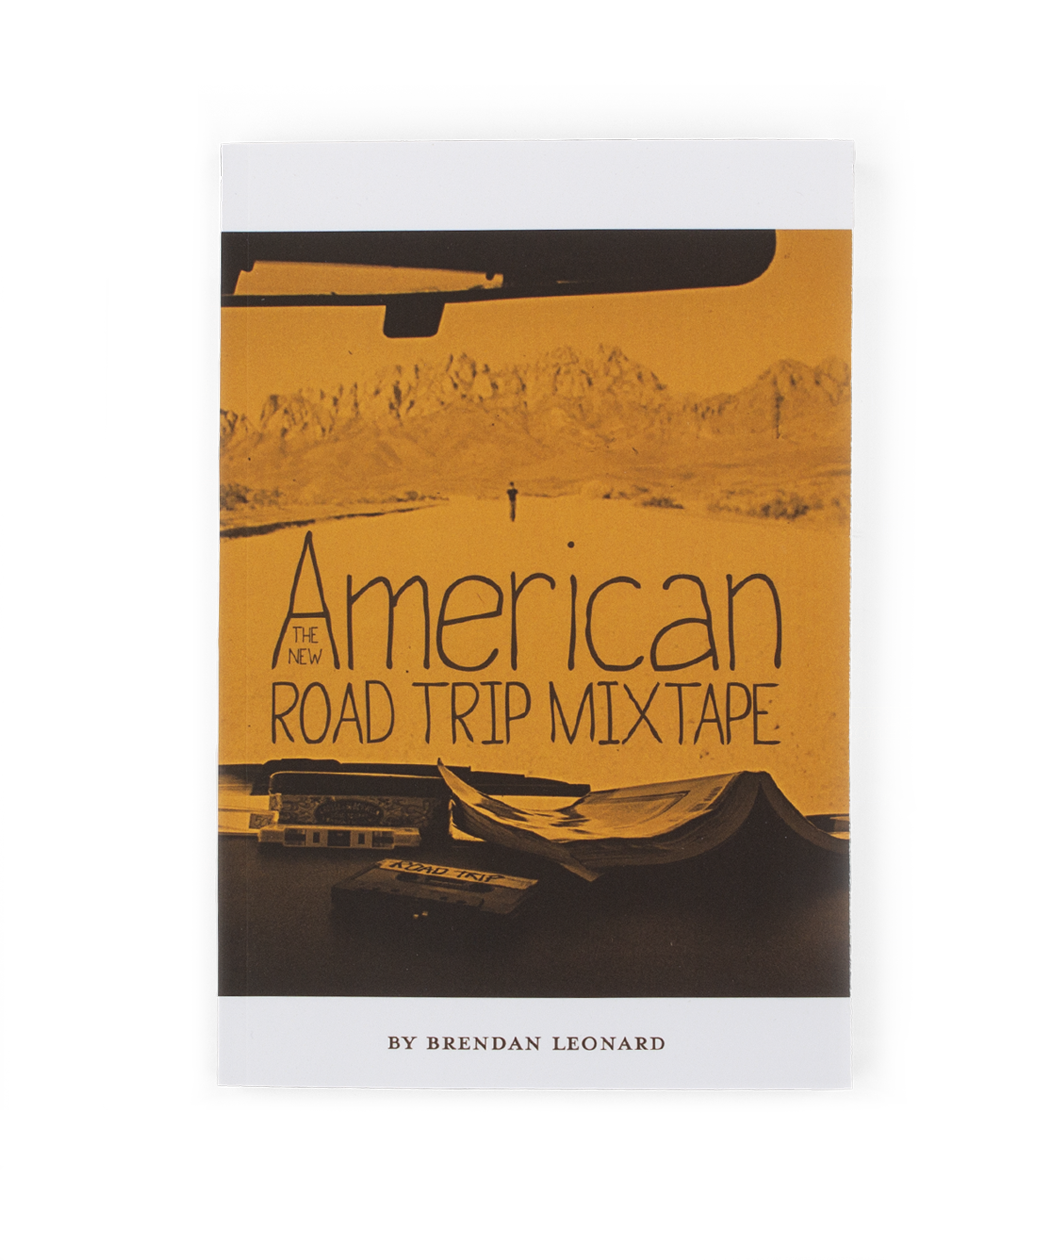 The cover of a book shows a sepia image of a car dashboard and a desert landscape with a man walking down the road. The title reads 